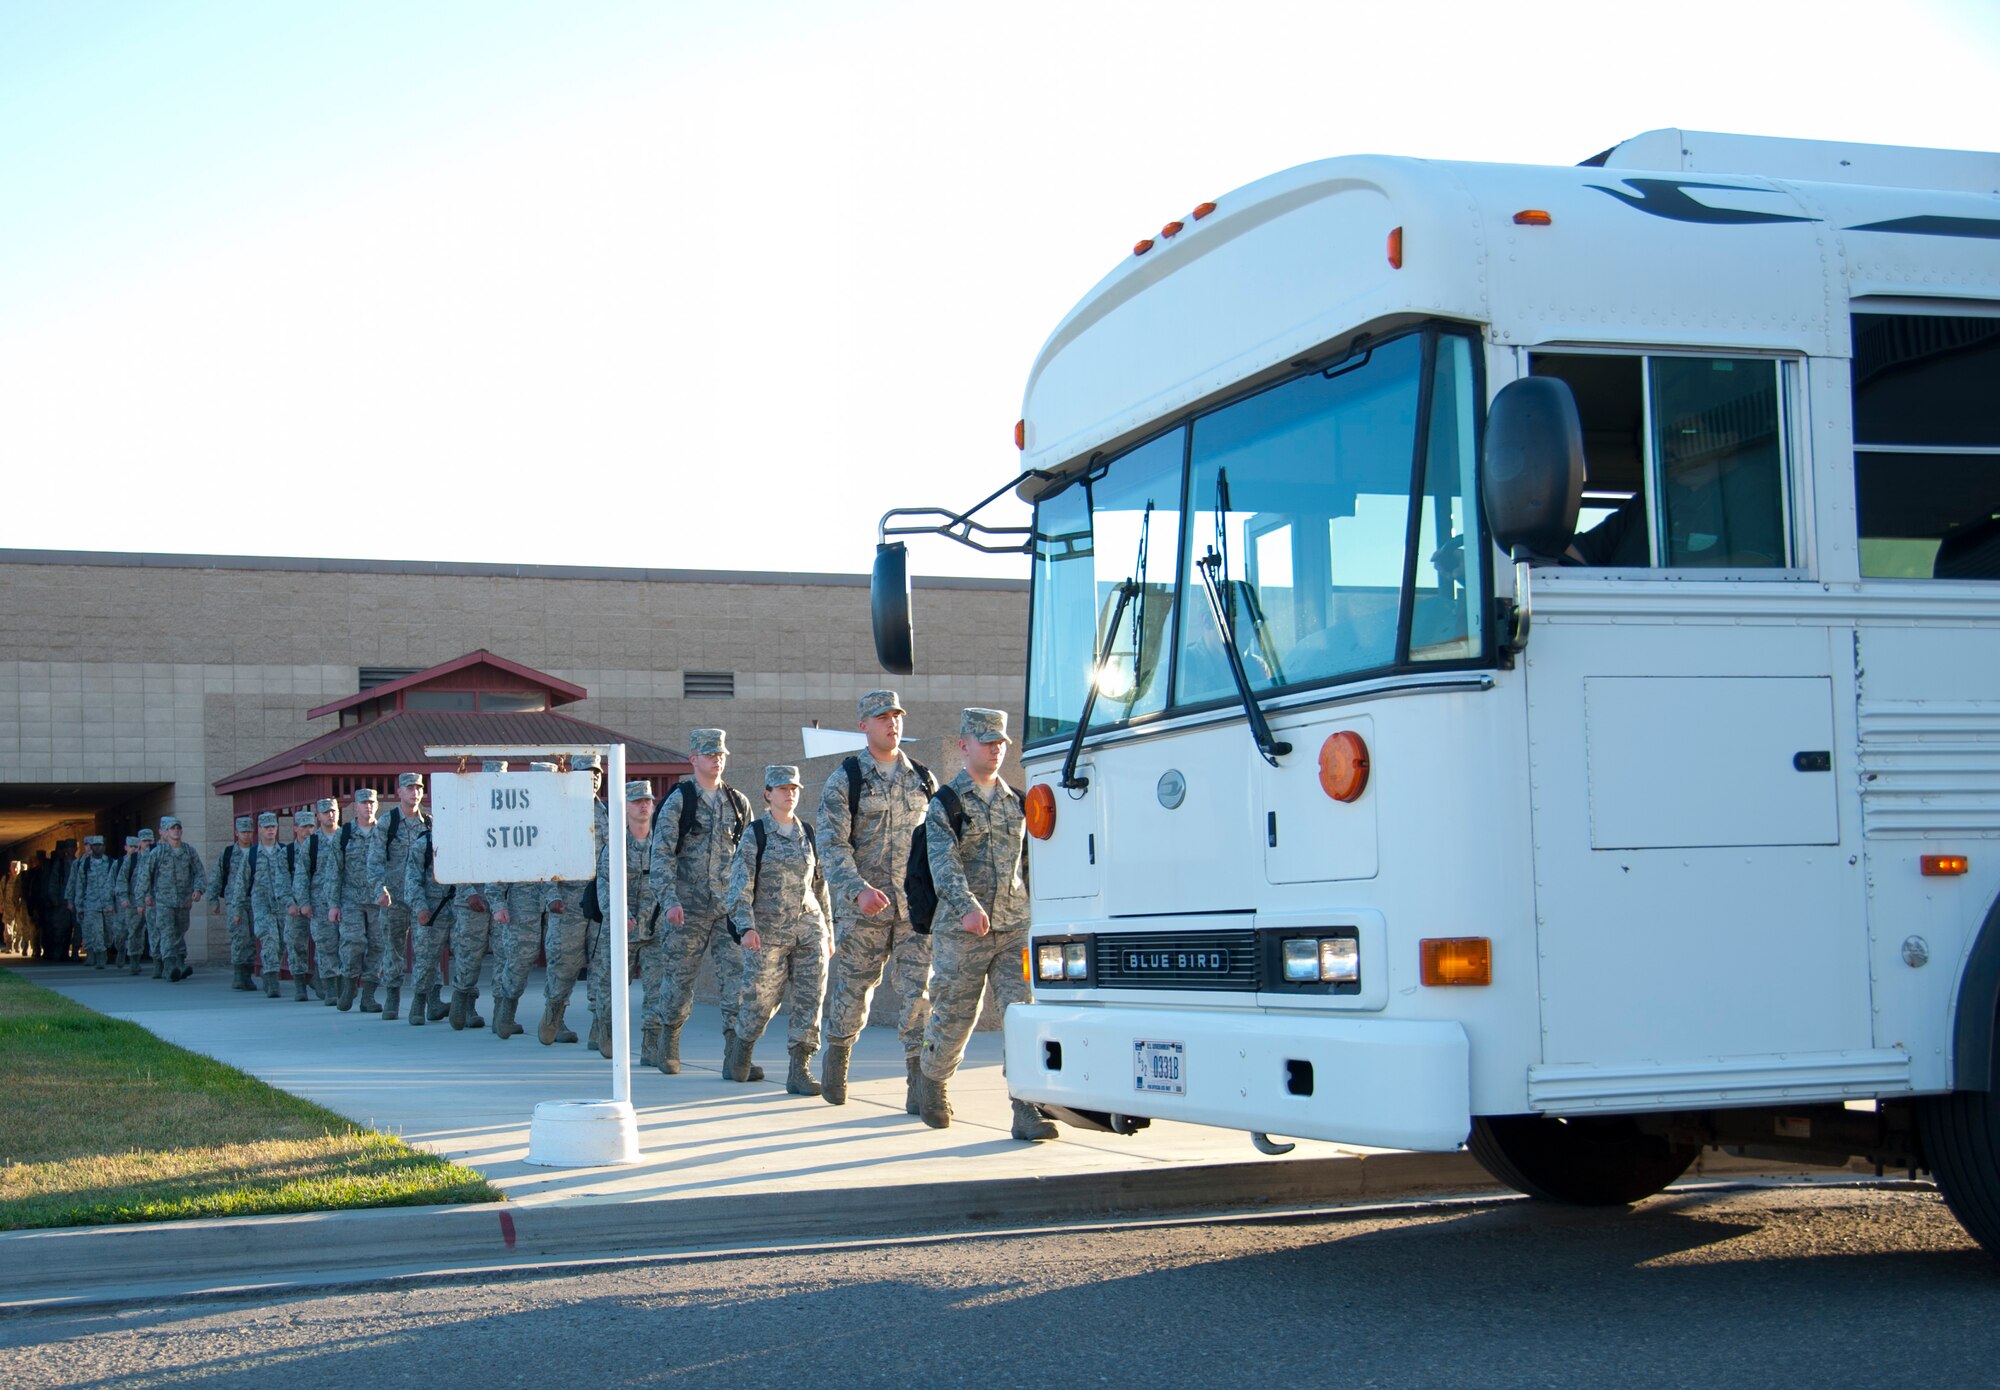 Students leaving the Vehicle Management Technical Schoolhouse at the 344th Training Squadron Det. 1, Vehicle Management Schoolhouse in Port Hueneme, Calif. This detachment educates over 1,500 students. Though many arrive directly from Air Force Basic Training, they can also be civilians, international students and members of other military services.  This world-class training includes basic and advanced fire truck, material handling equipment, vehicle & equipment maintenance, and vehicle management & analysis courses. (U.S. Air Force Photo/Tech. Sgt. Thomas Kessler)